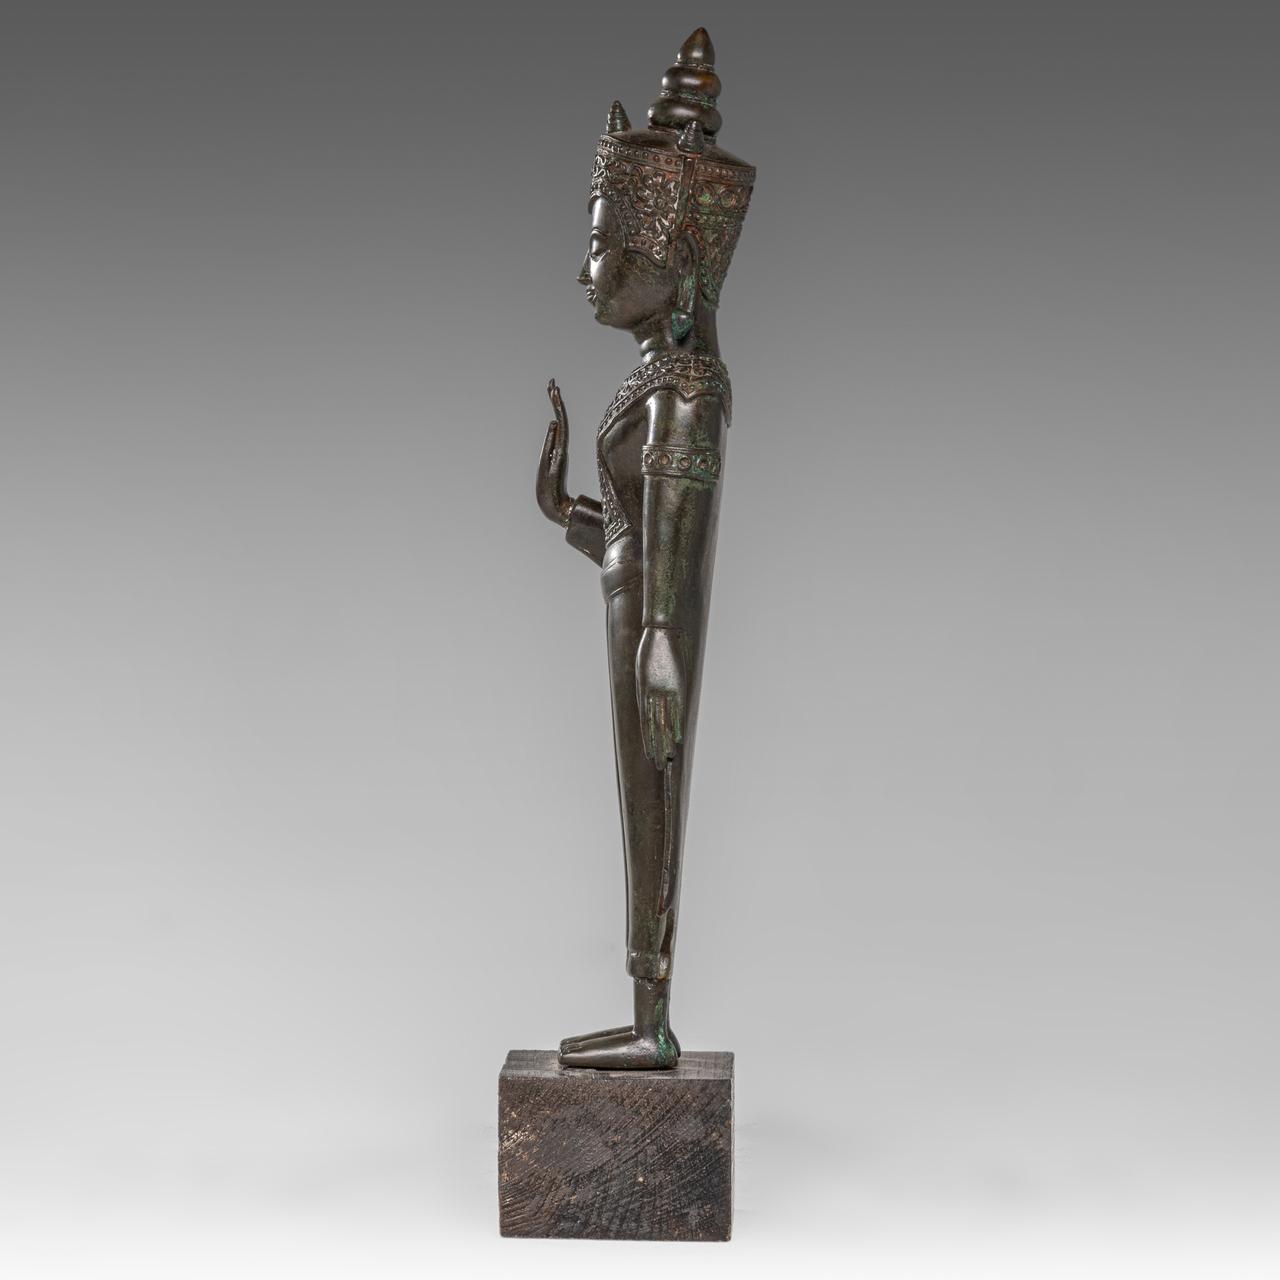 A Thai bronze figure of standing crowned Buddha, Ayutthaya style, 19thC, H 39,8 cm - Image 3 of 6